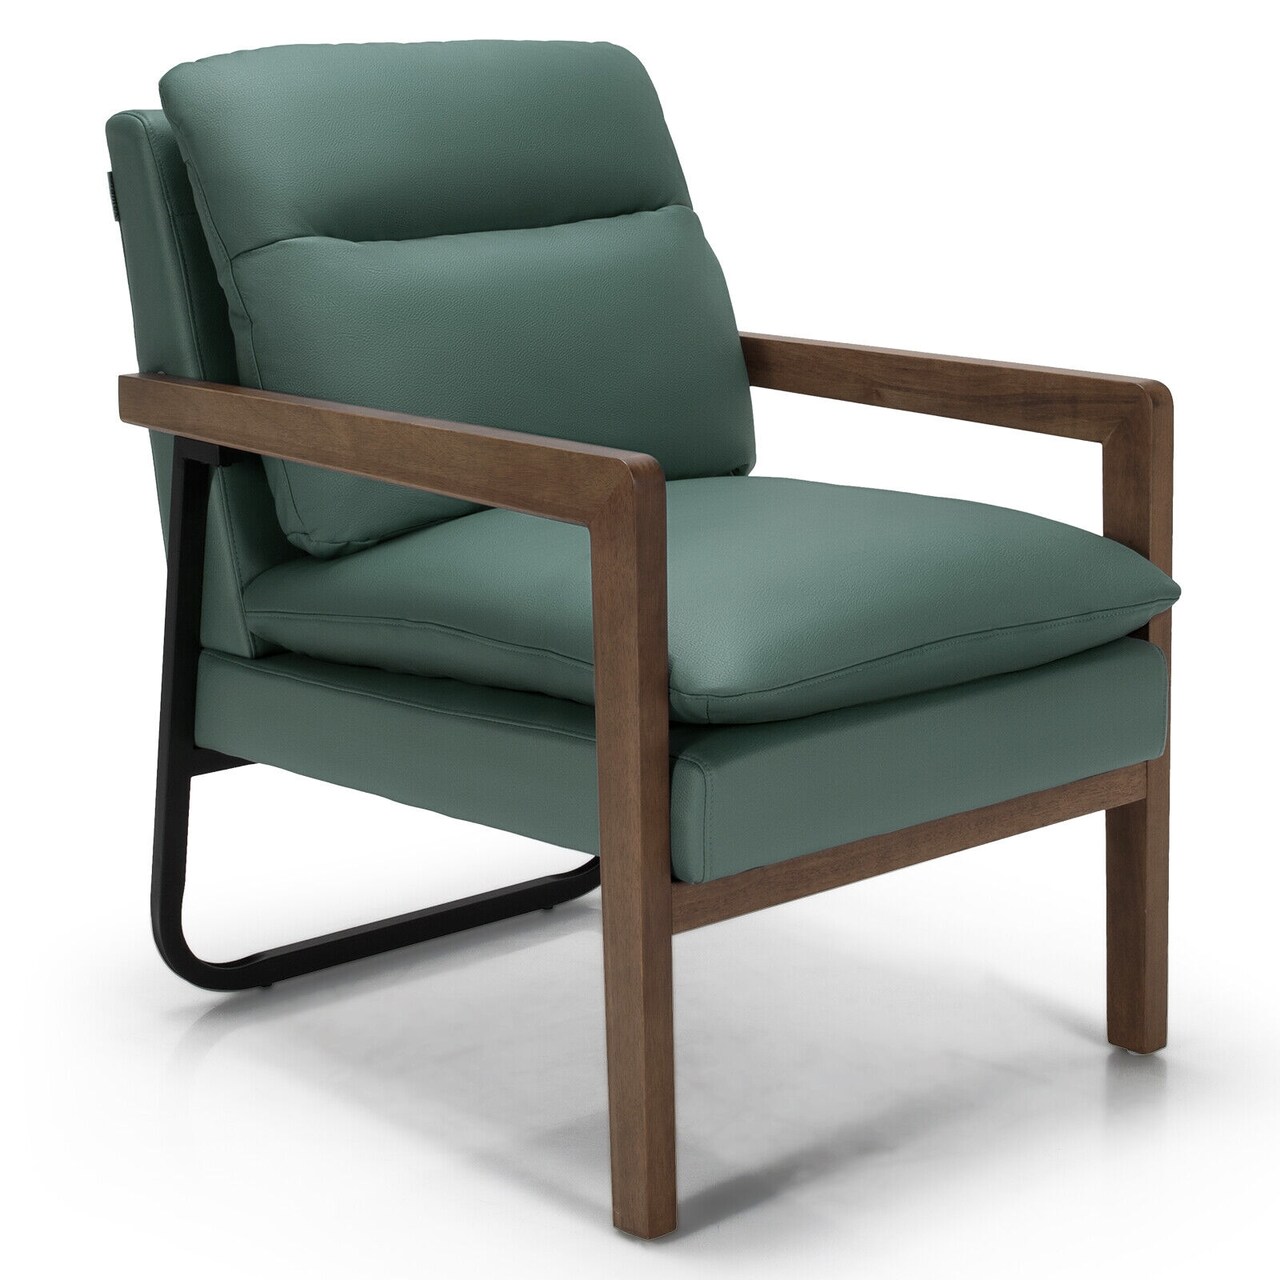 Single Sofa Chair with Extra-Thick Padded Backrest and Seat